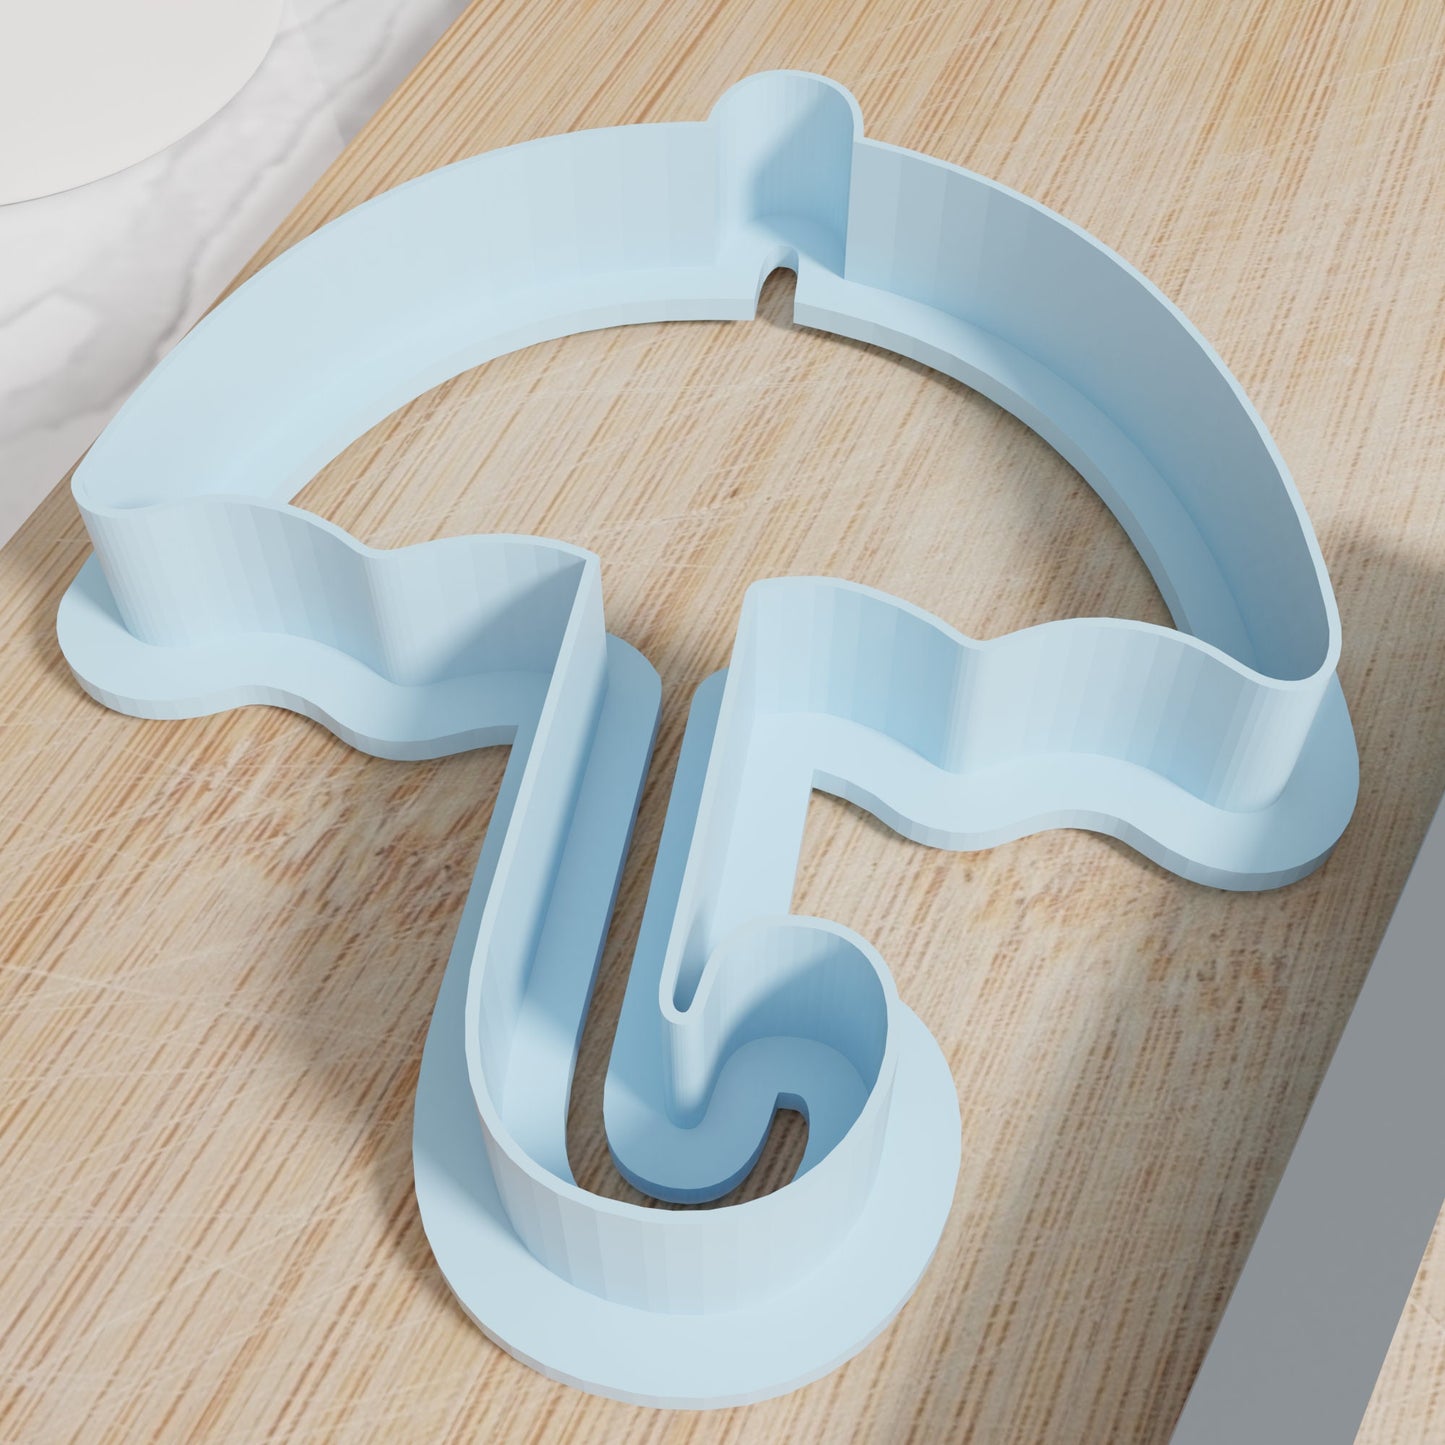 Squid Game Dalgona Cookie Cutter Set.  4 Cutters - Circle, Square, Triangle, Umbrella.  Fun for the whole Family!